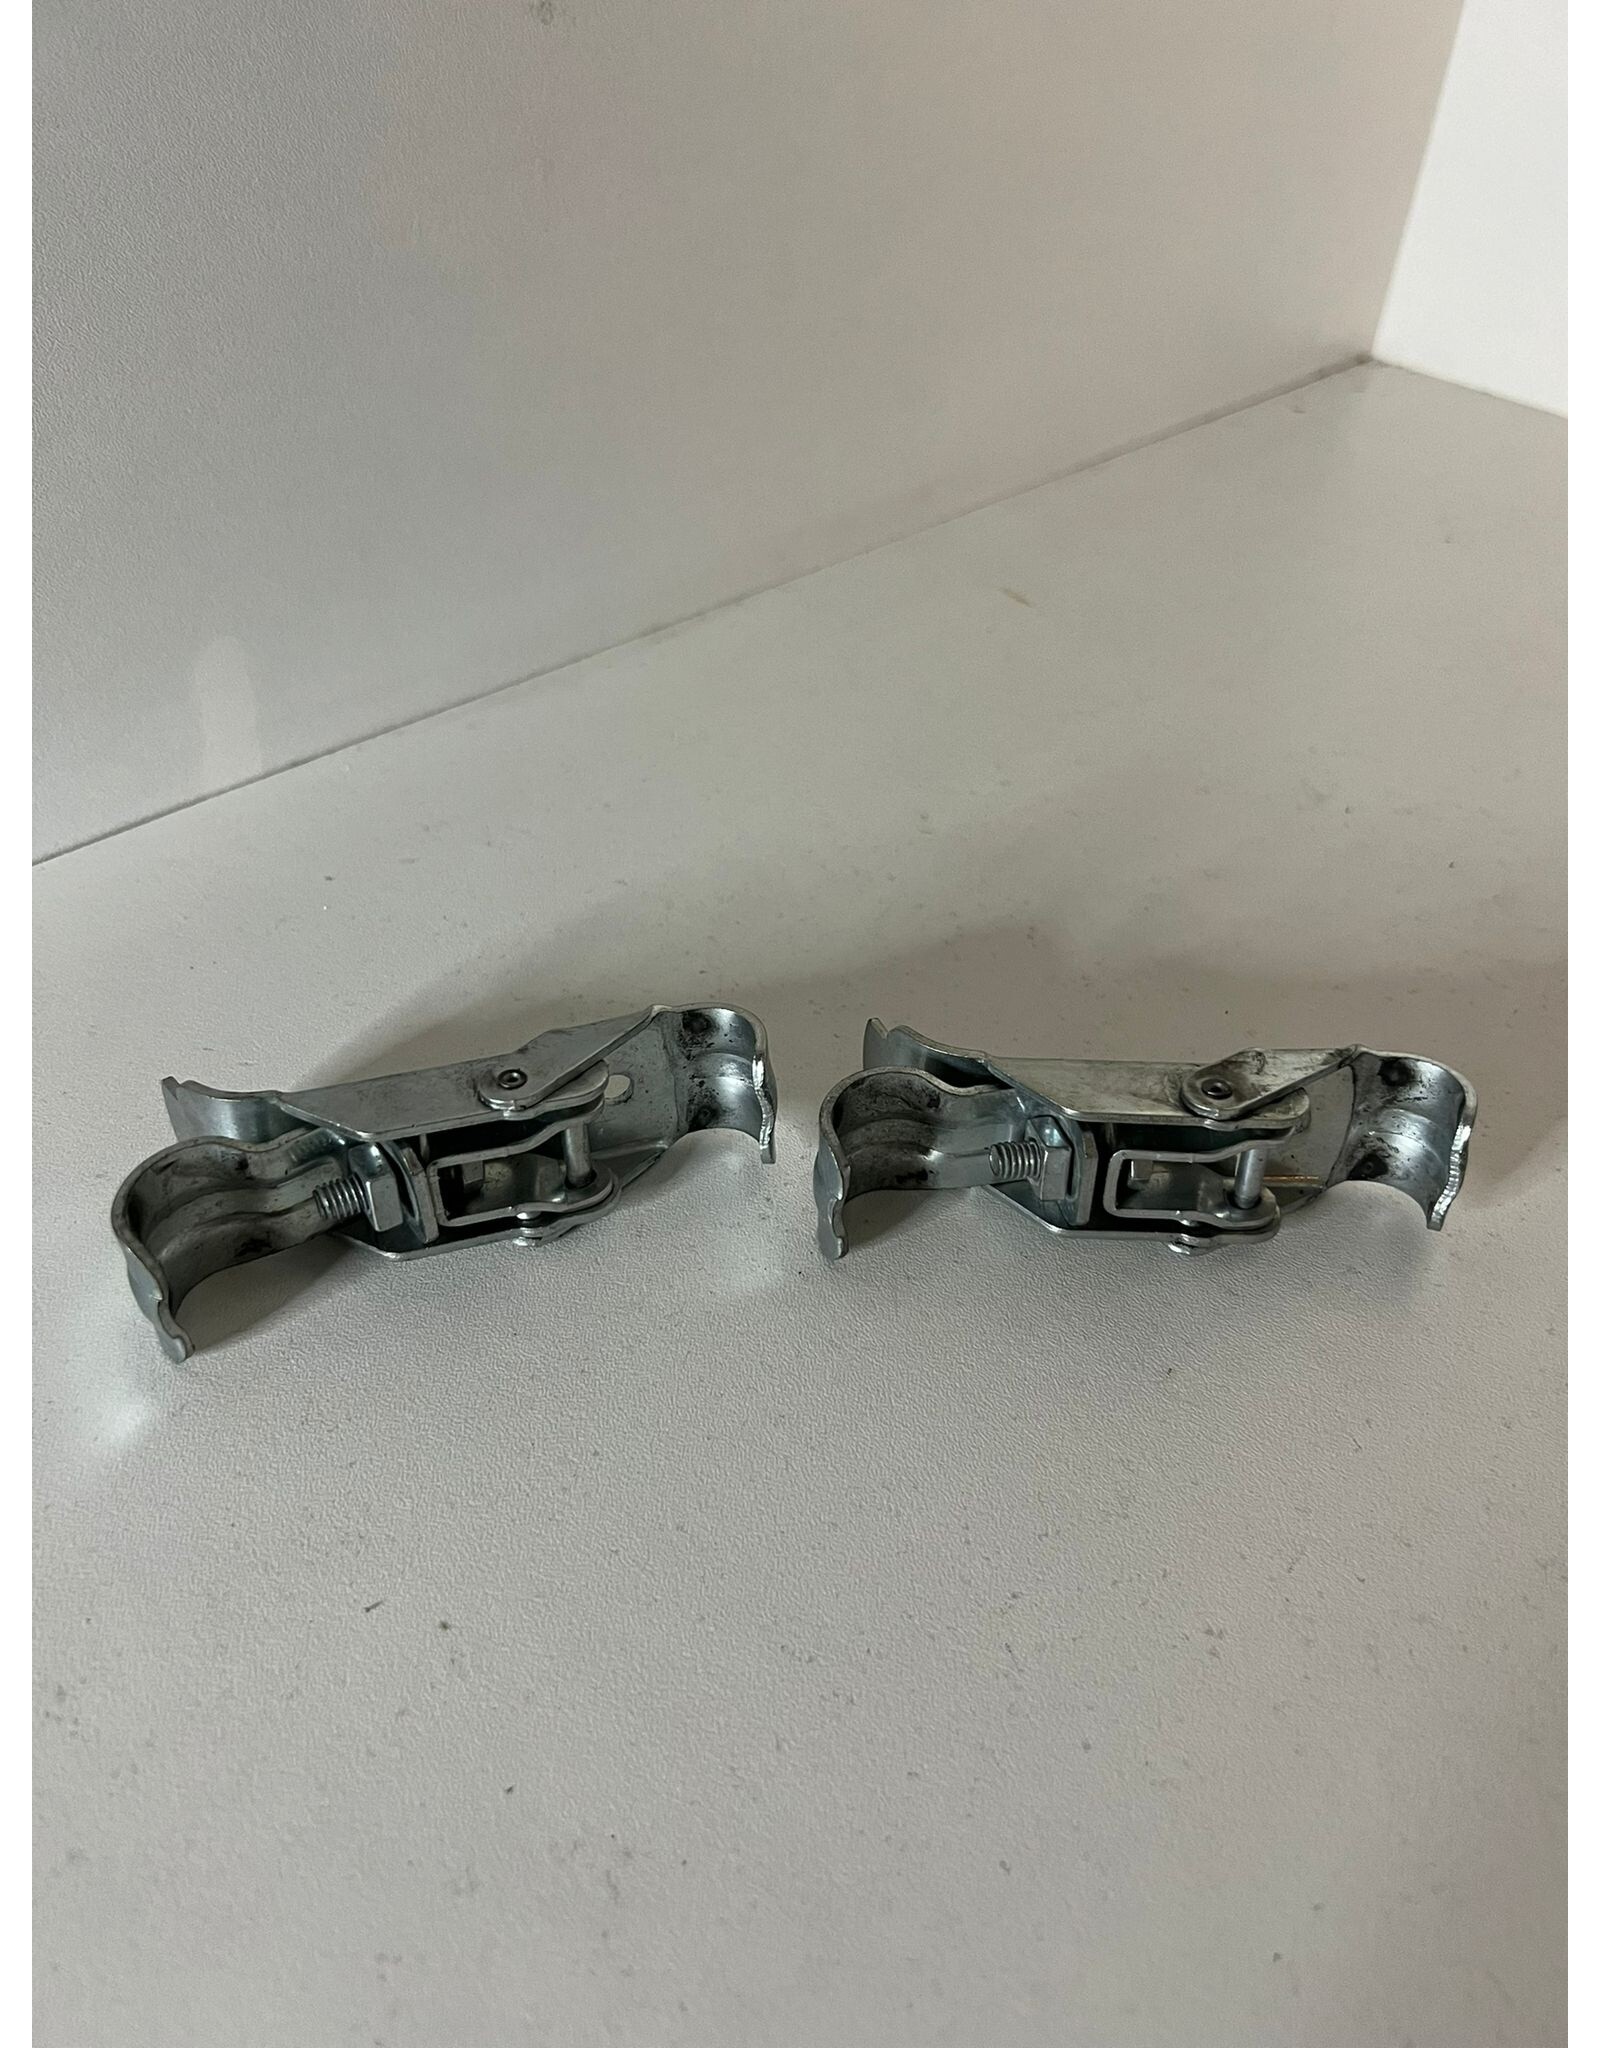 Used KG Front bumper clamp set